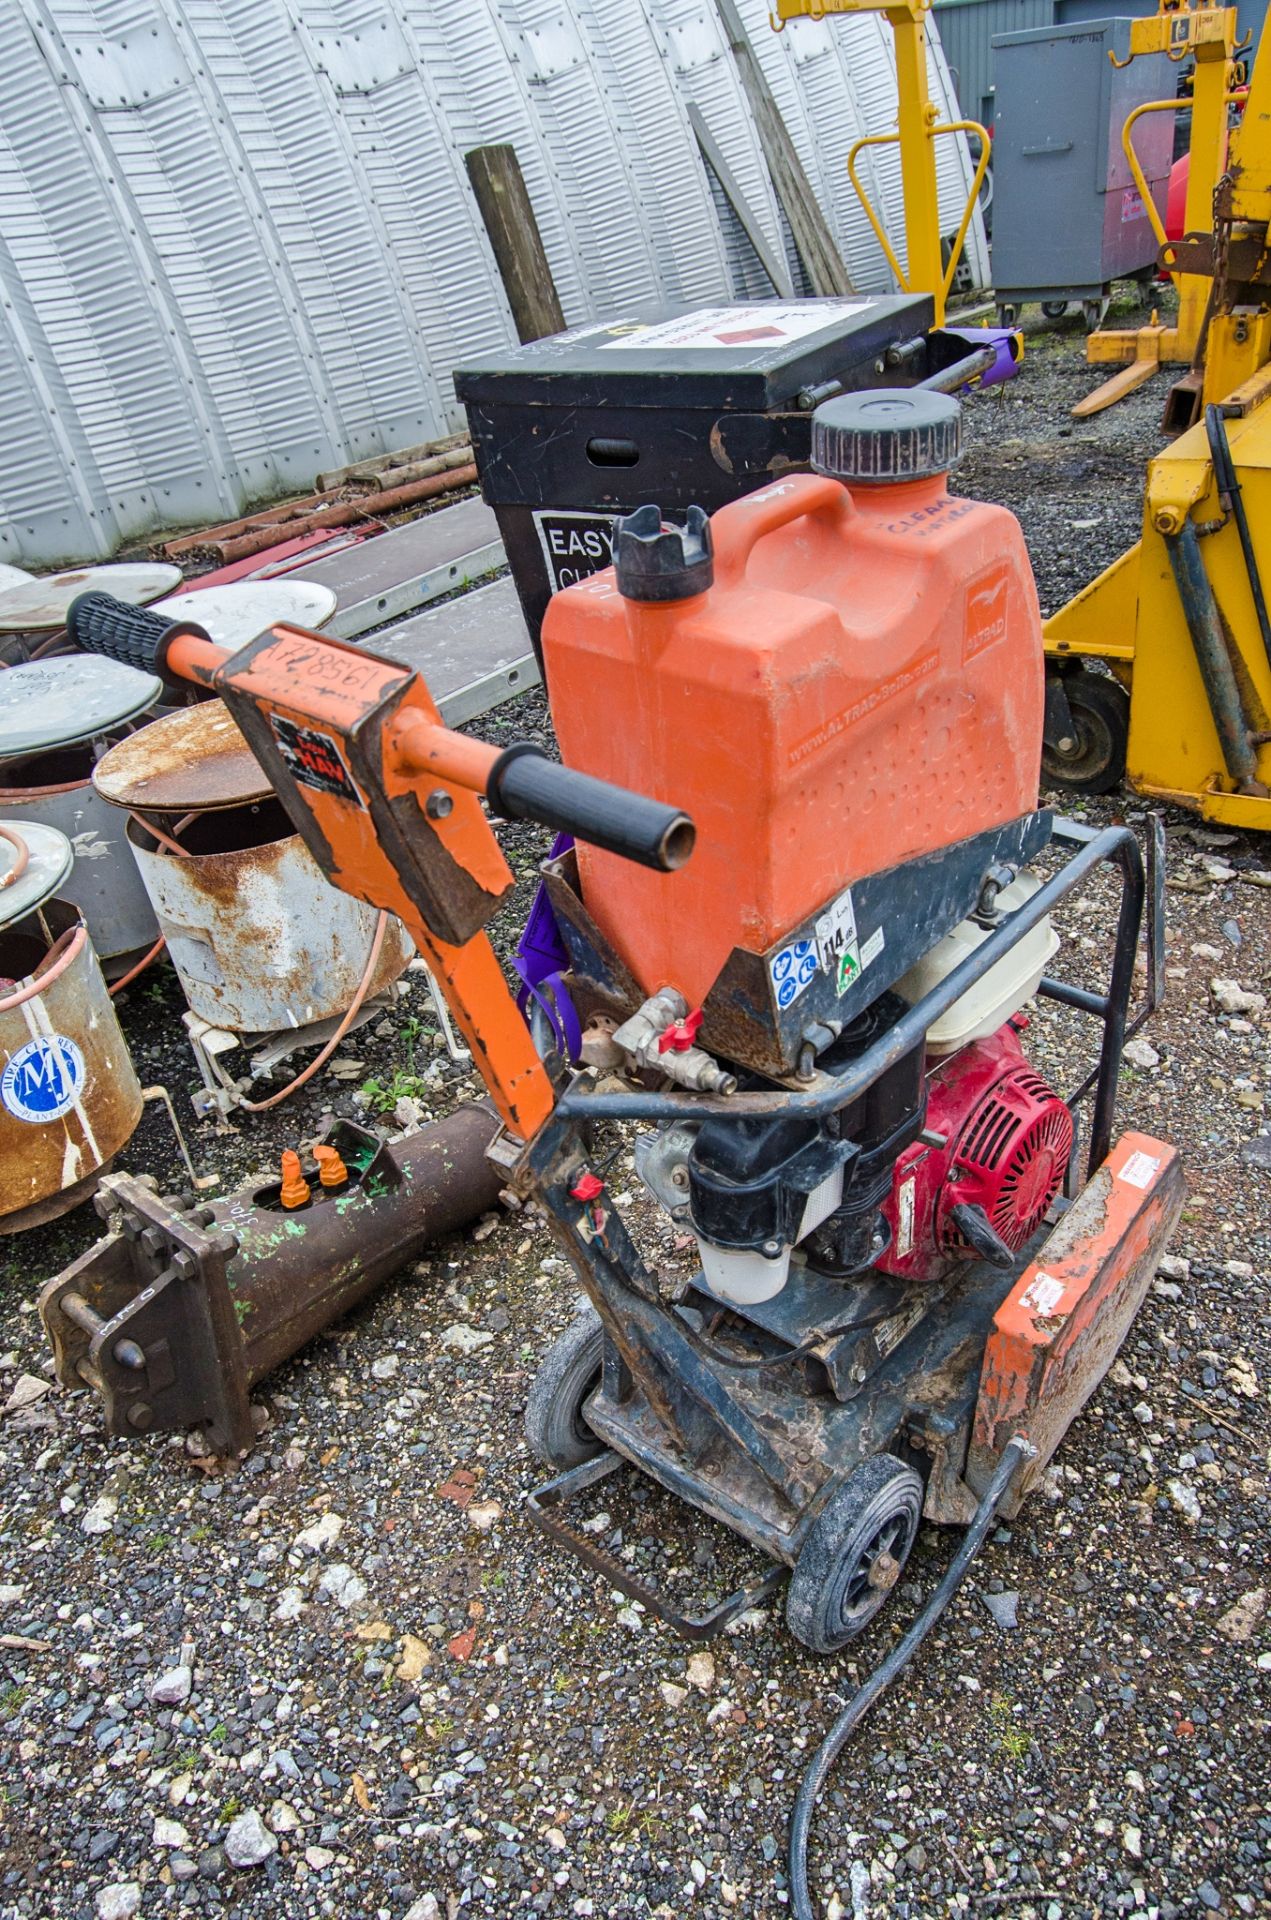 Altrad Belle Compact petrol driven road saw A728561 - Image 2 of 3